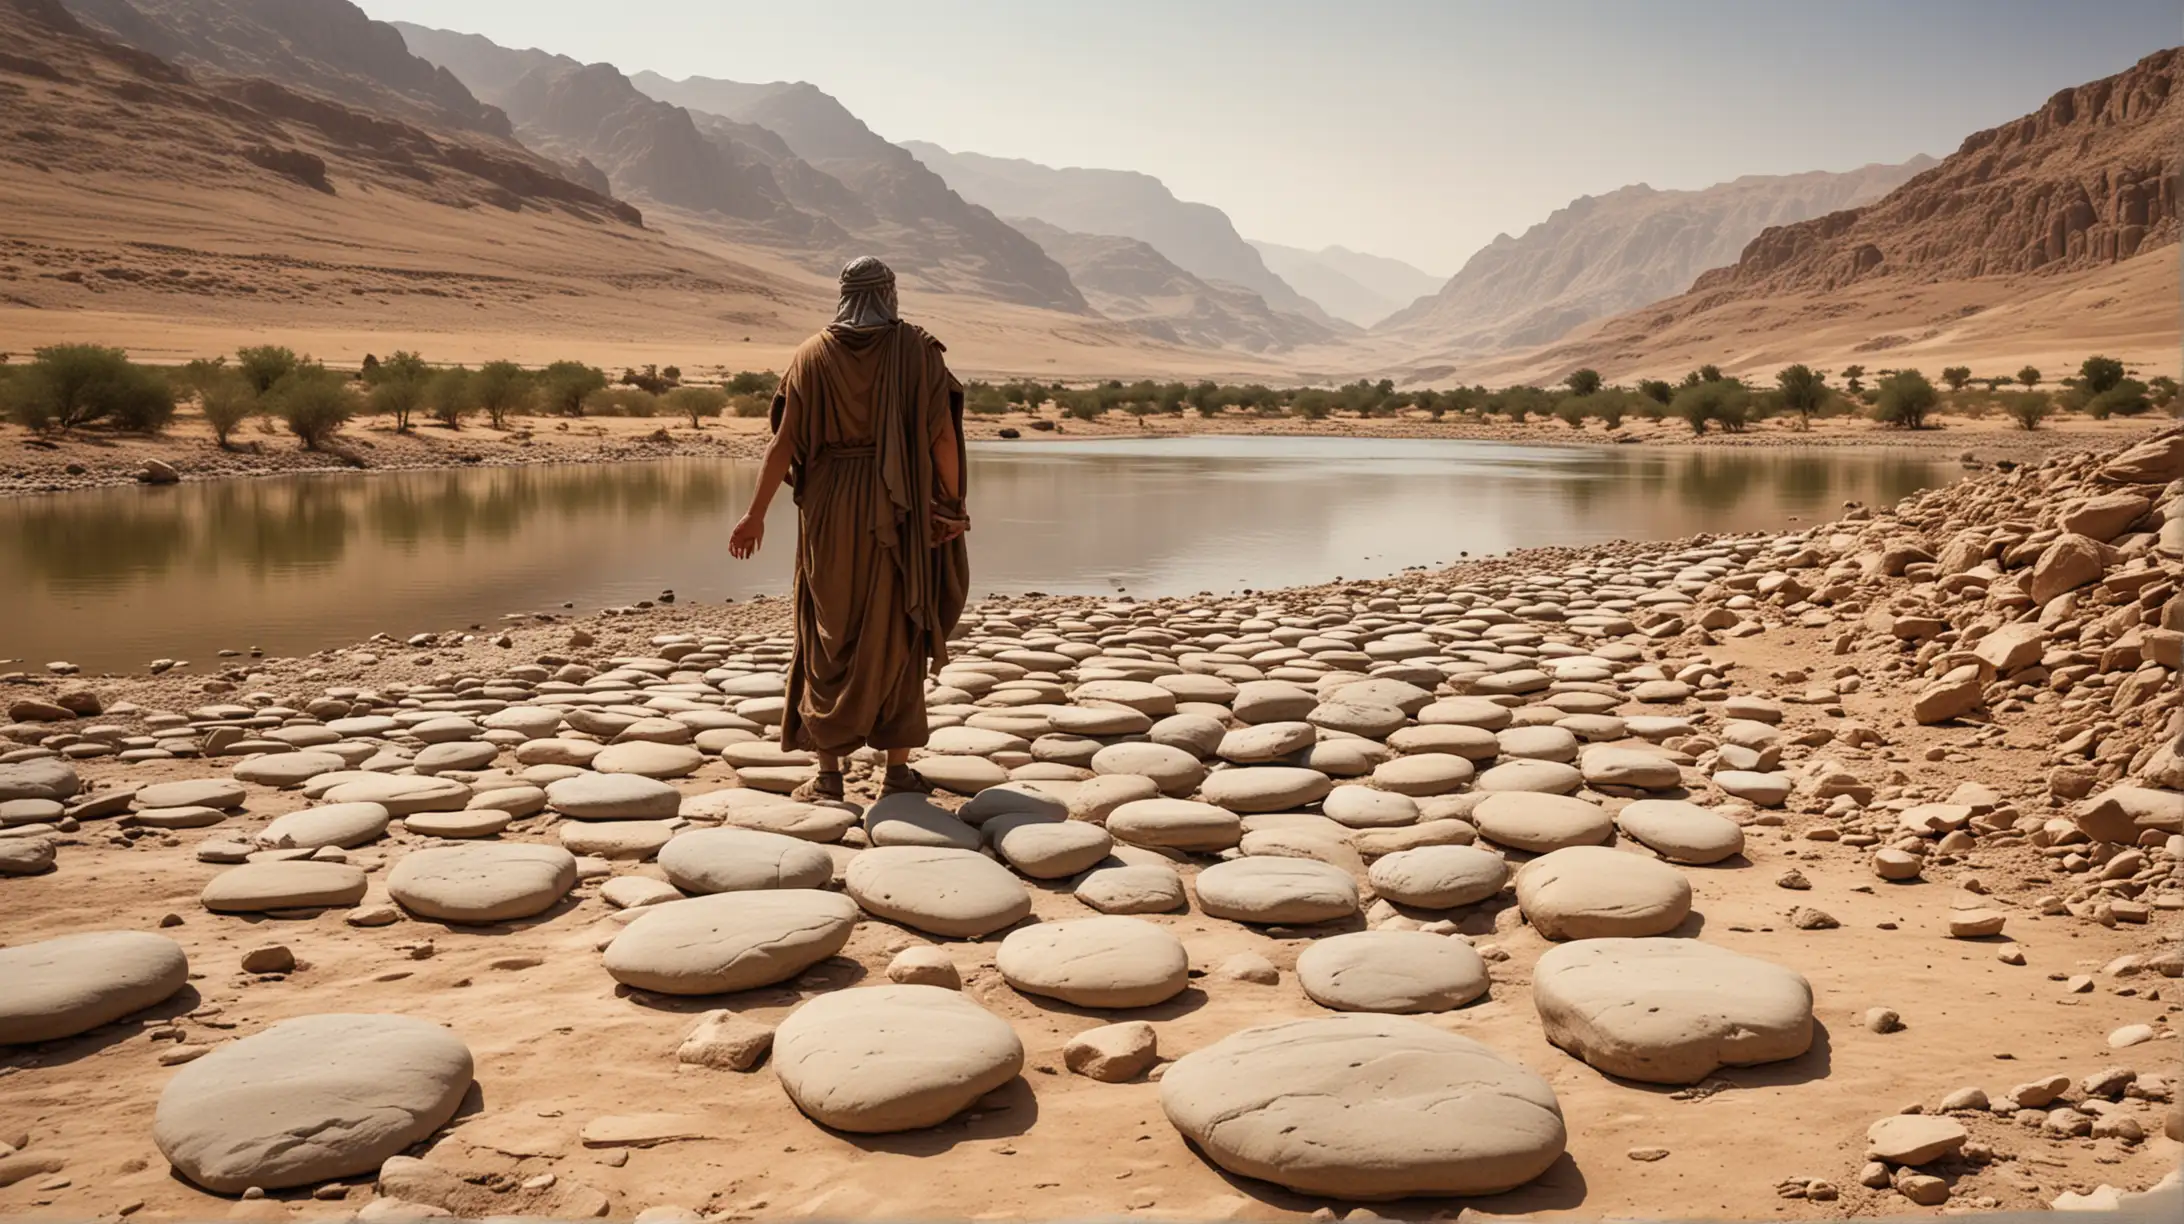 12 large flat smooth stones, the size of which  2 men would need to carry, in the background, desert mountains and a a river.  Set during the Biblical era of Moses, in the Middle East.